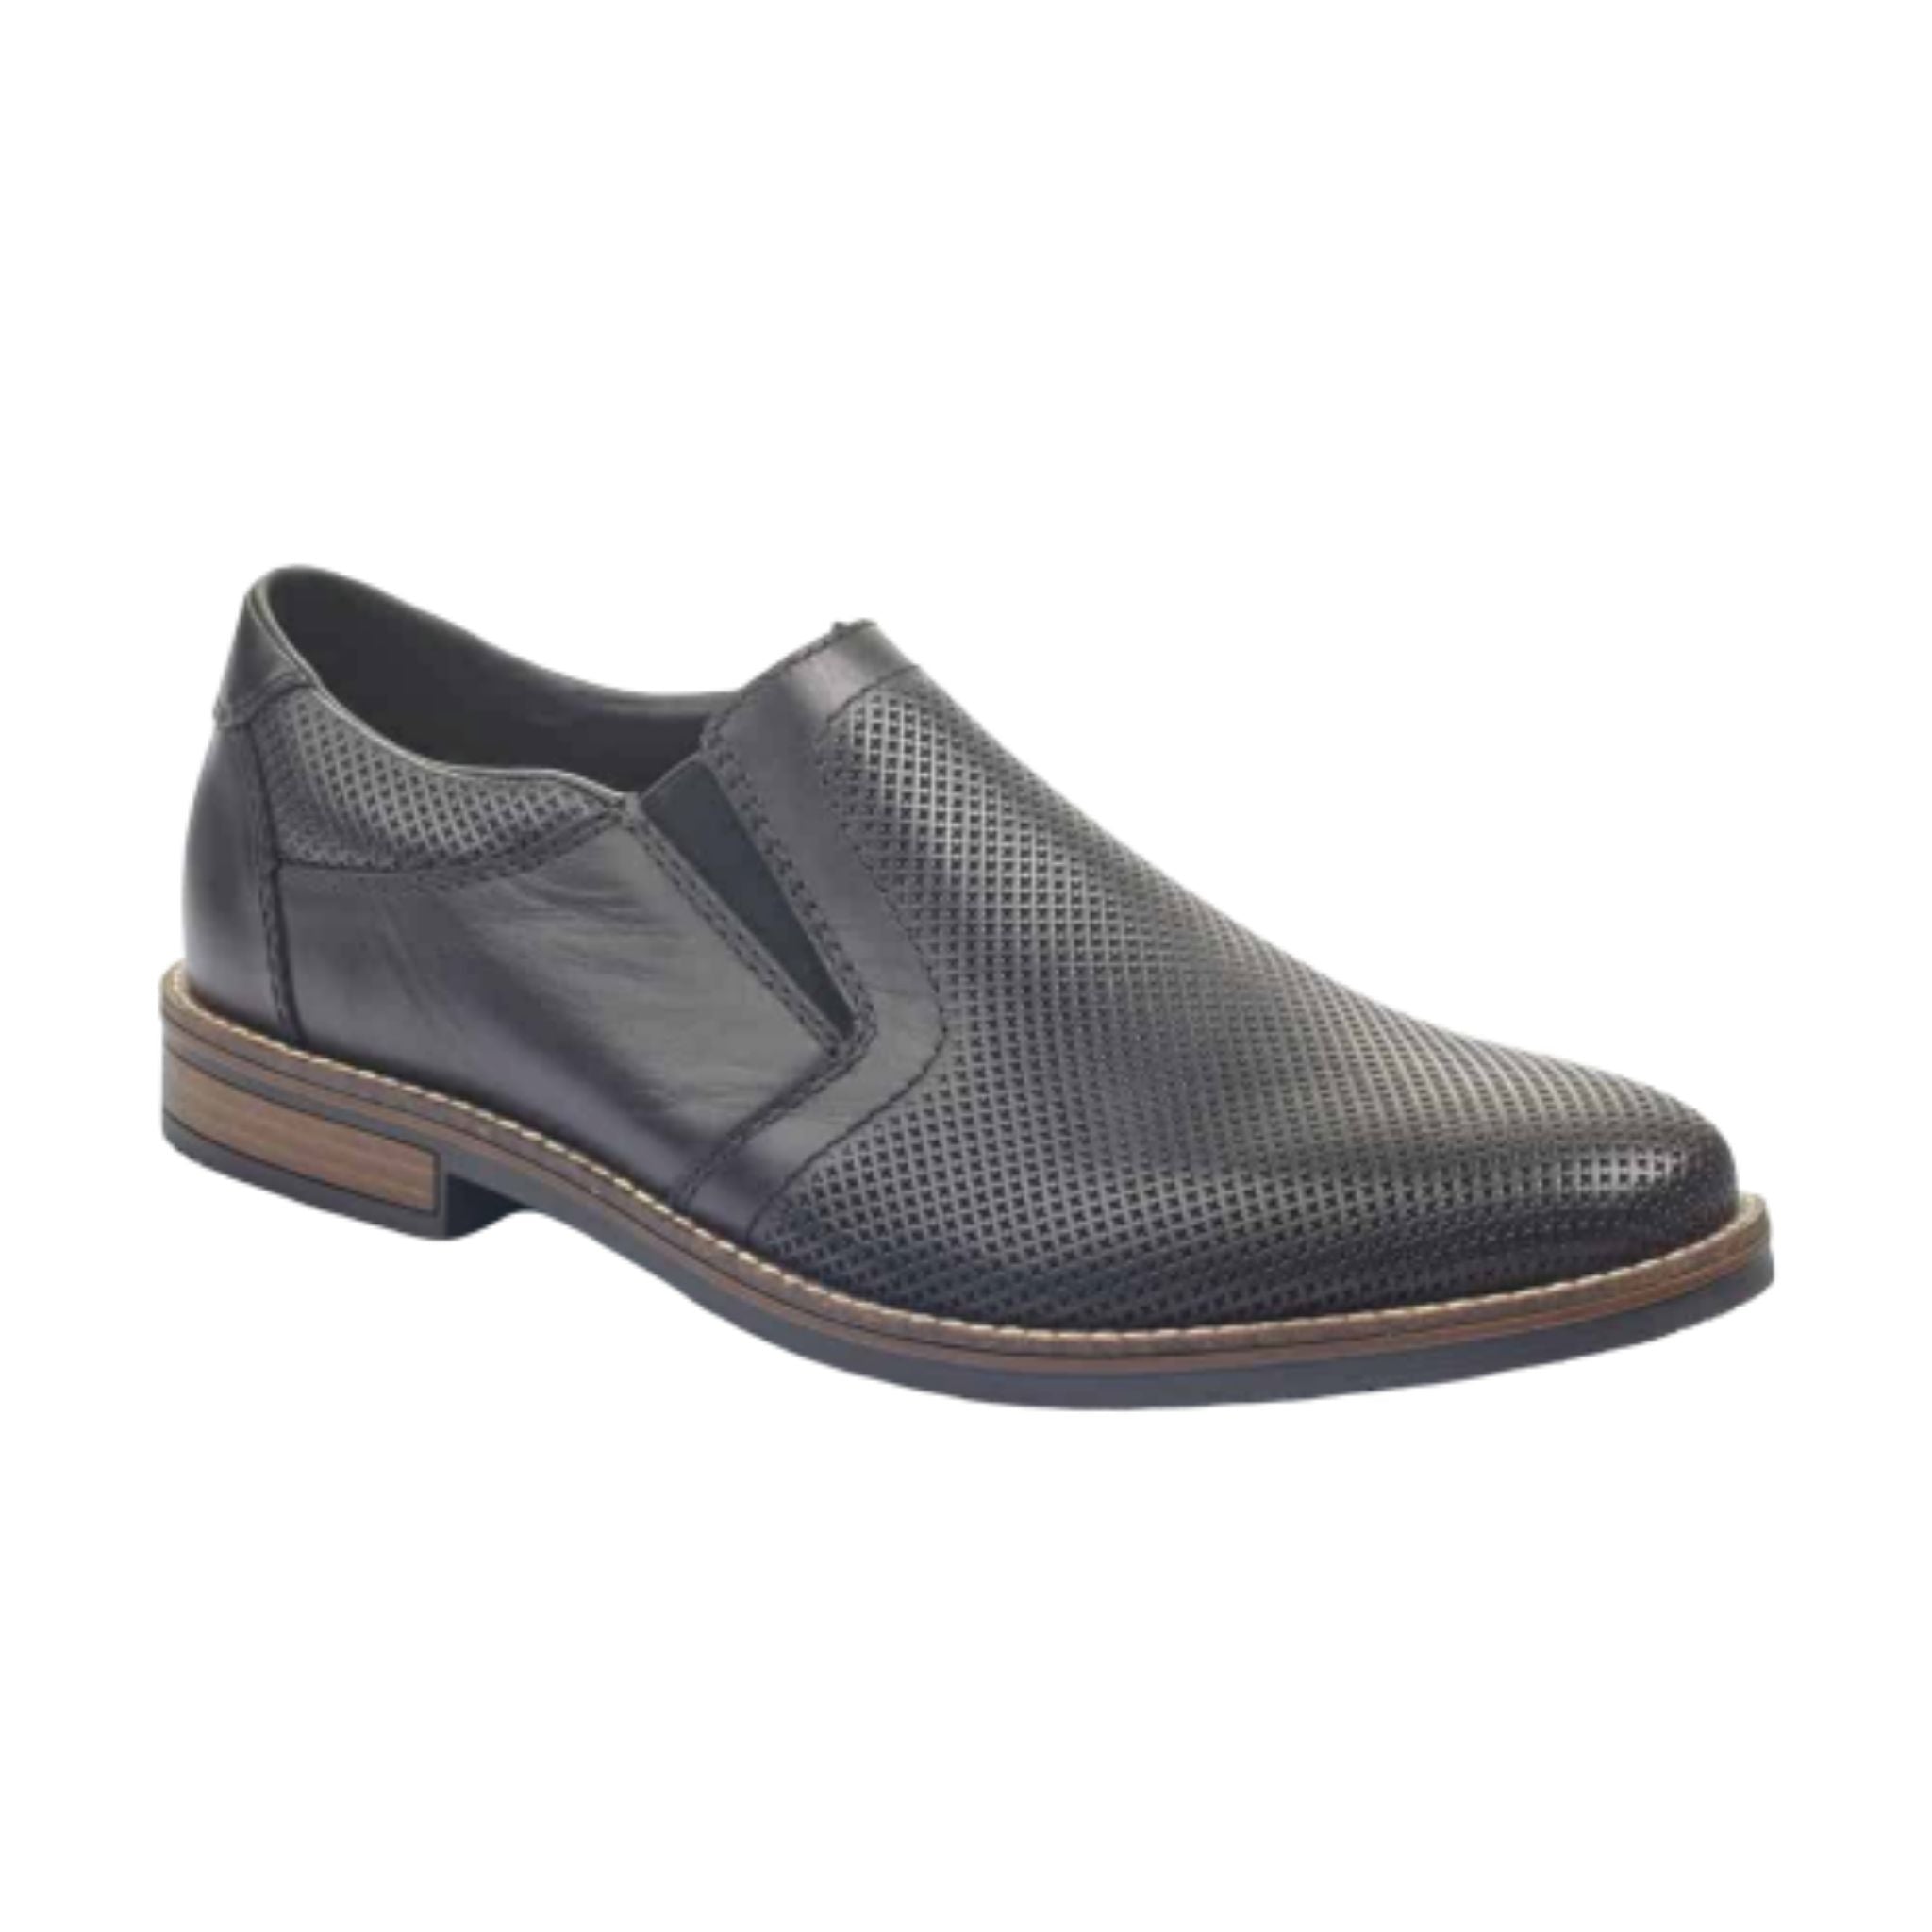 Men's black, semi-dress loafer with perforations. Made by Rieker.